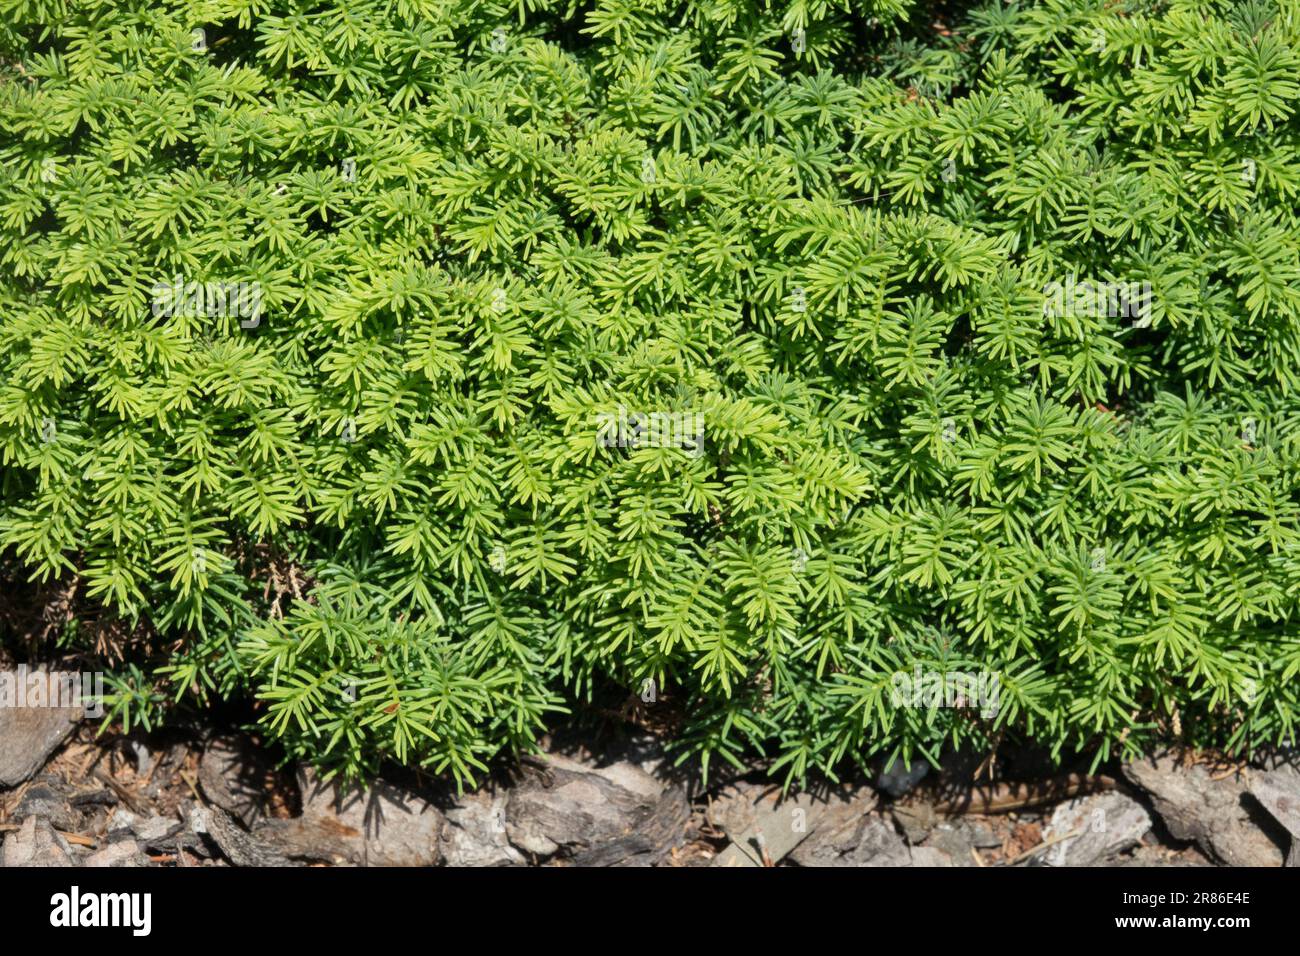 Norway spruce, Picea abies 'Little Gem' Spruce foliage Stock Photo